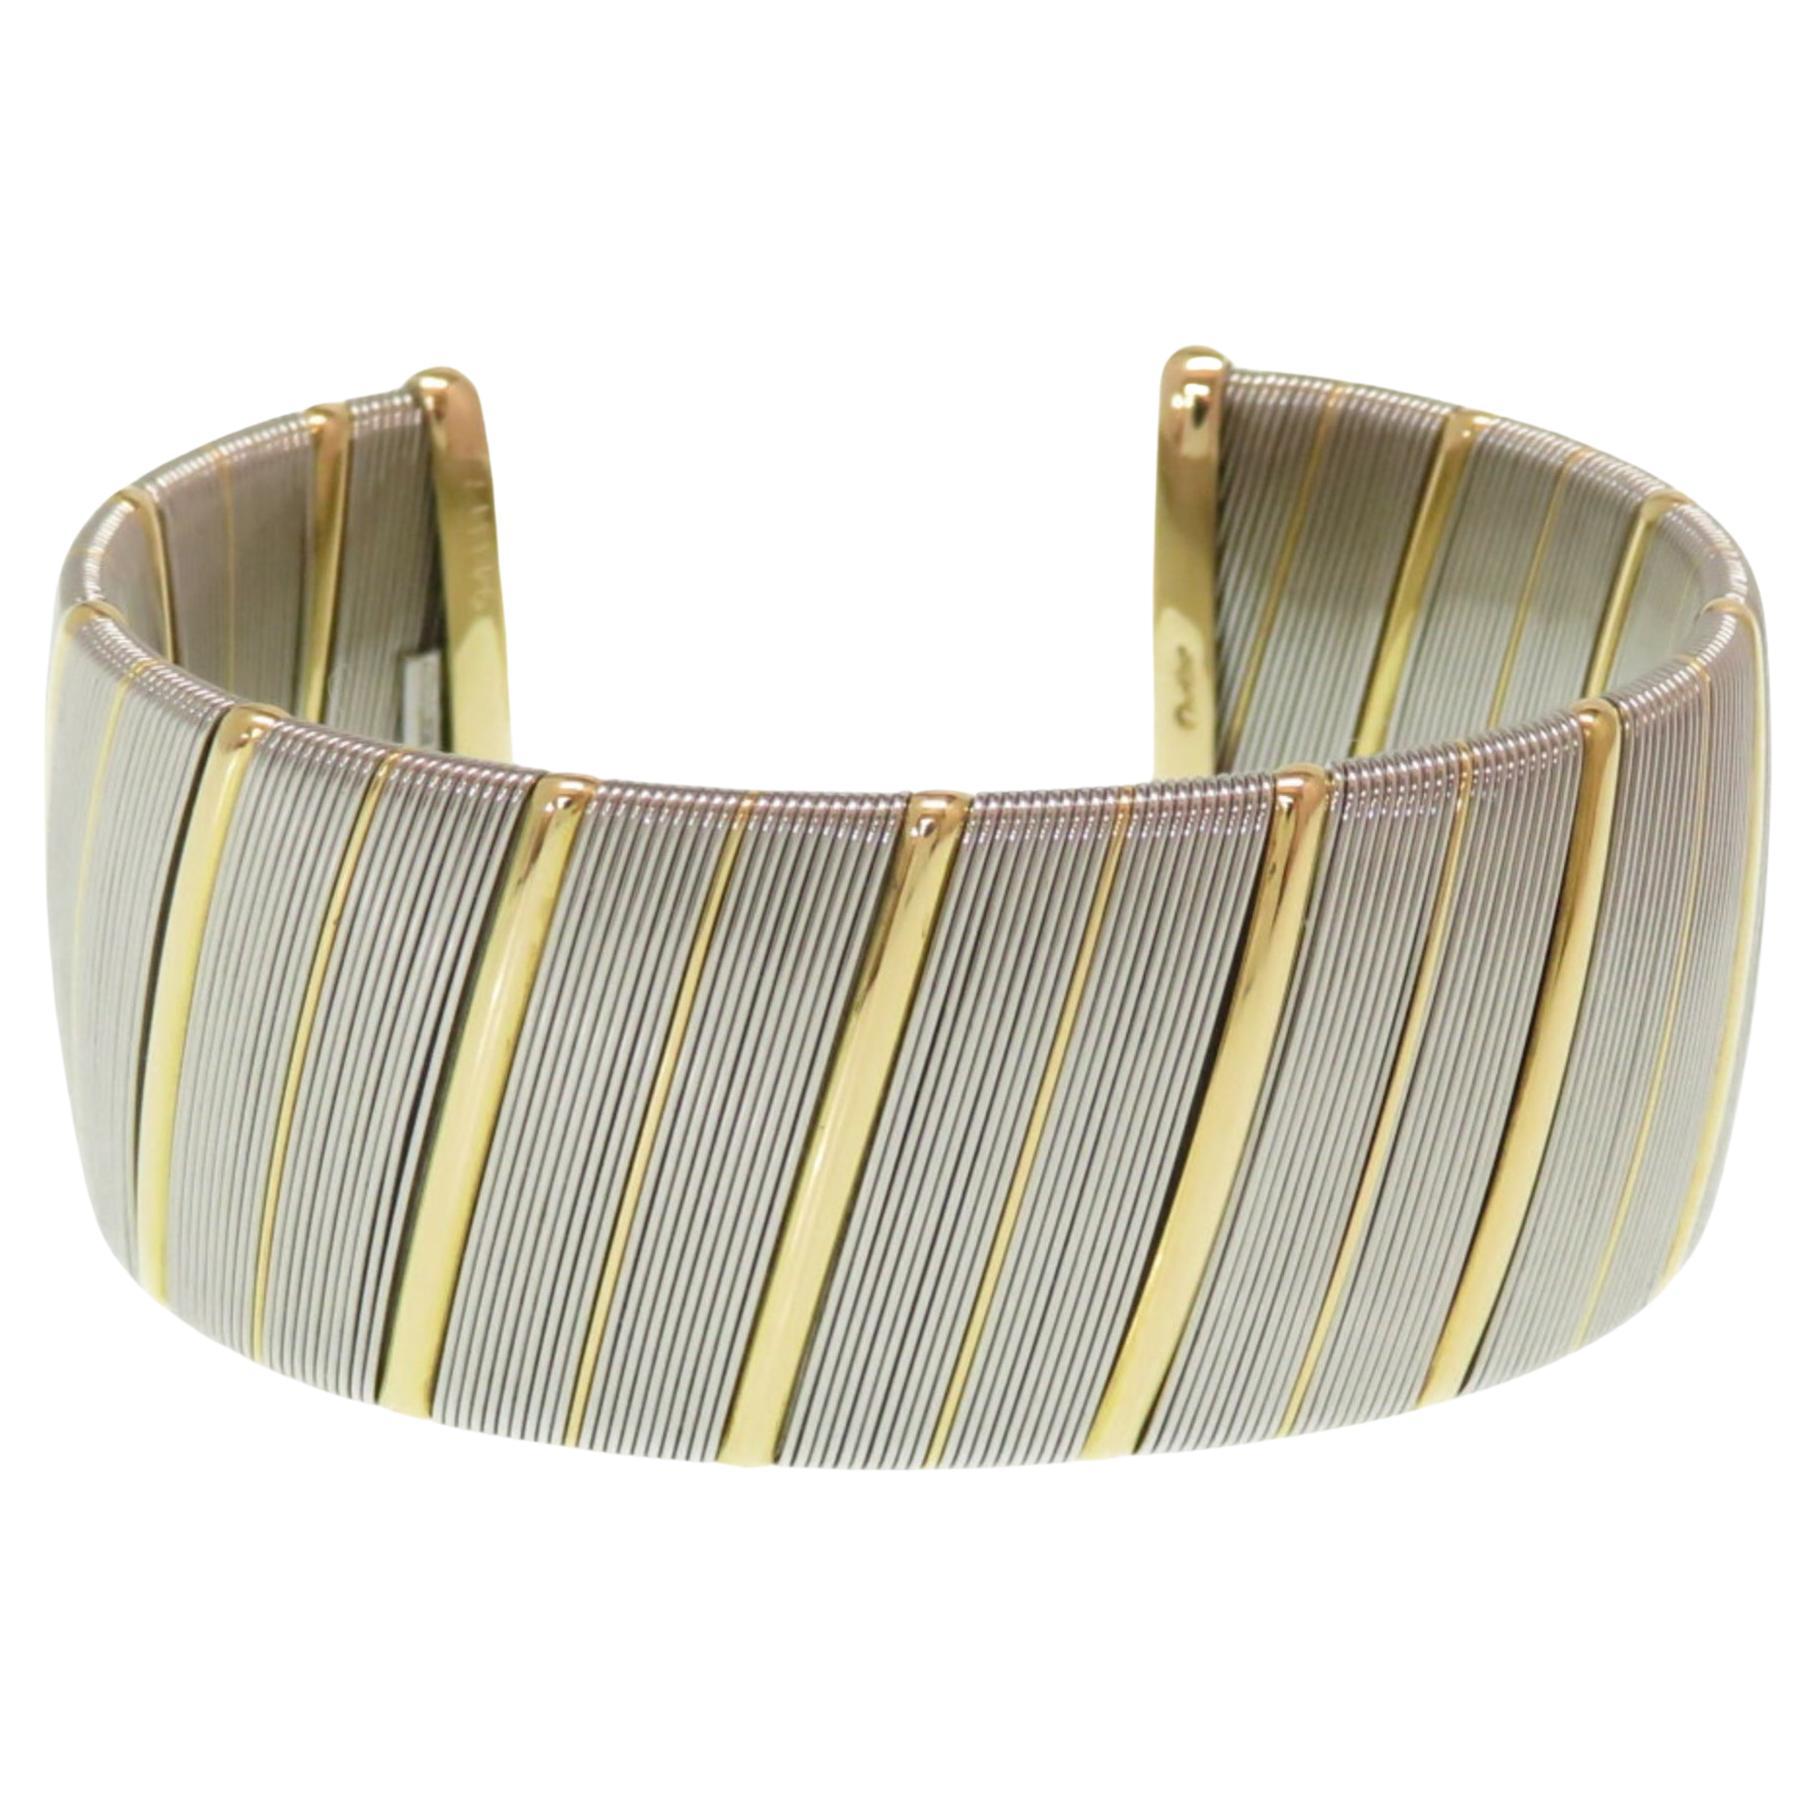 Cartier Antique Bangle in 18K Gold, Silver and Stainless Steel